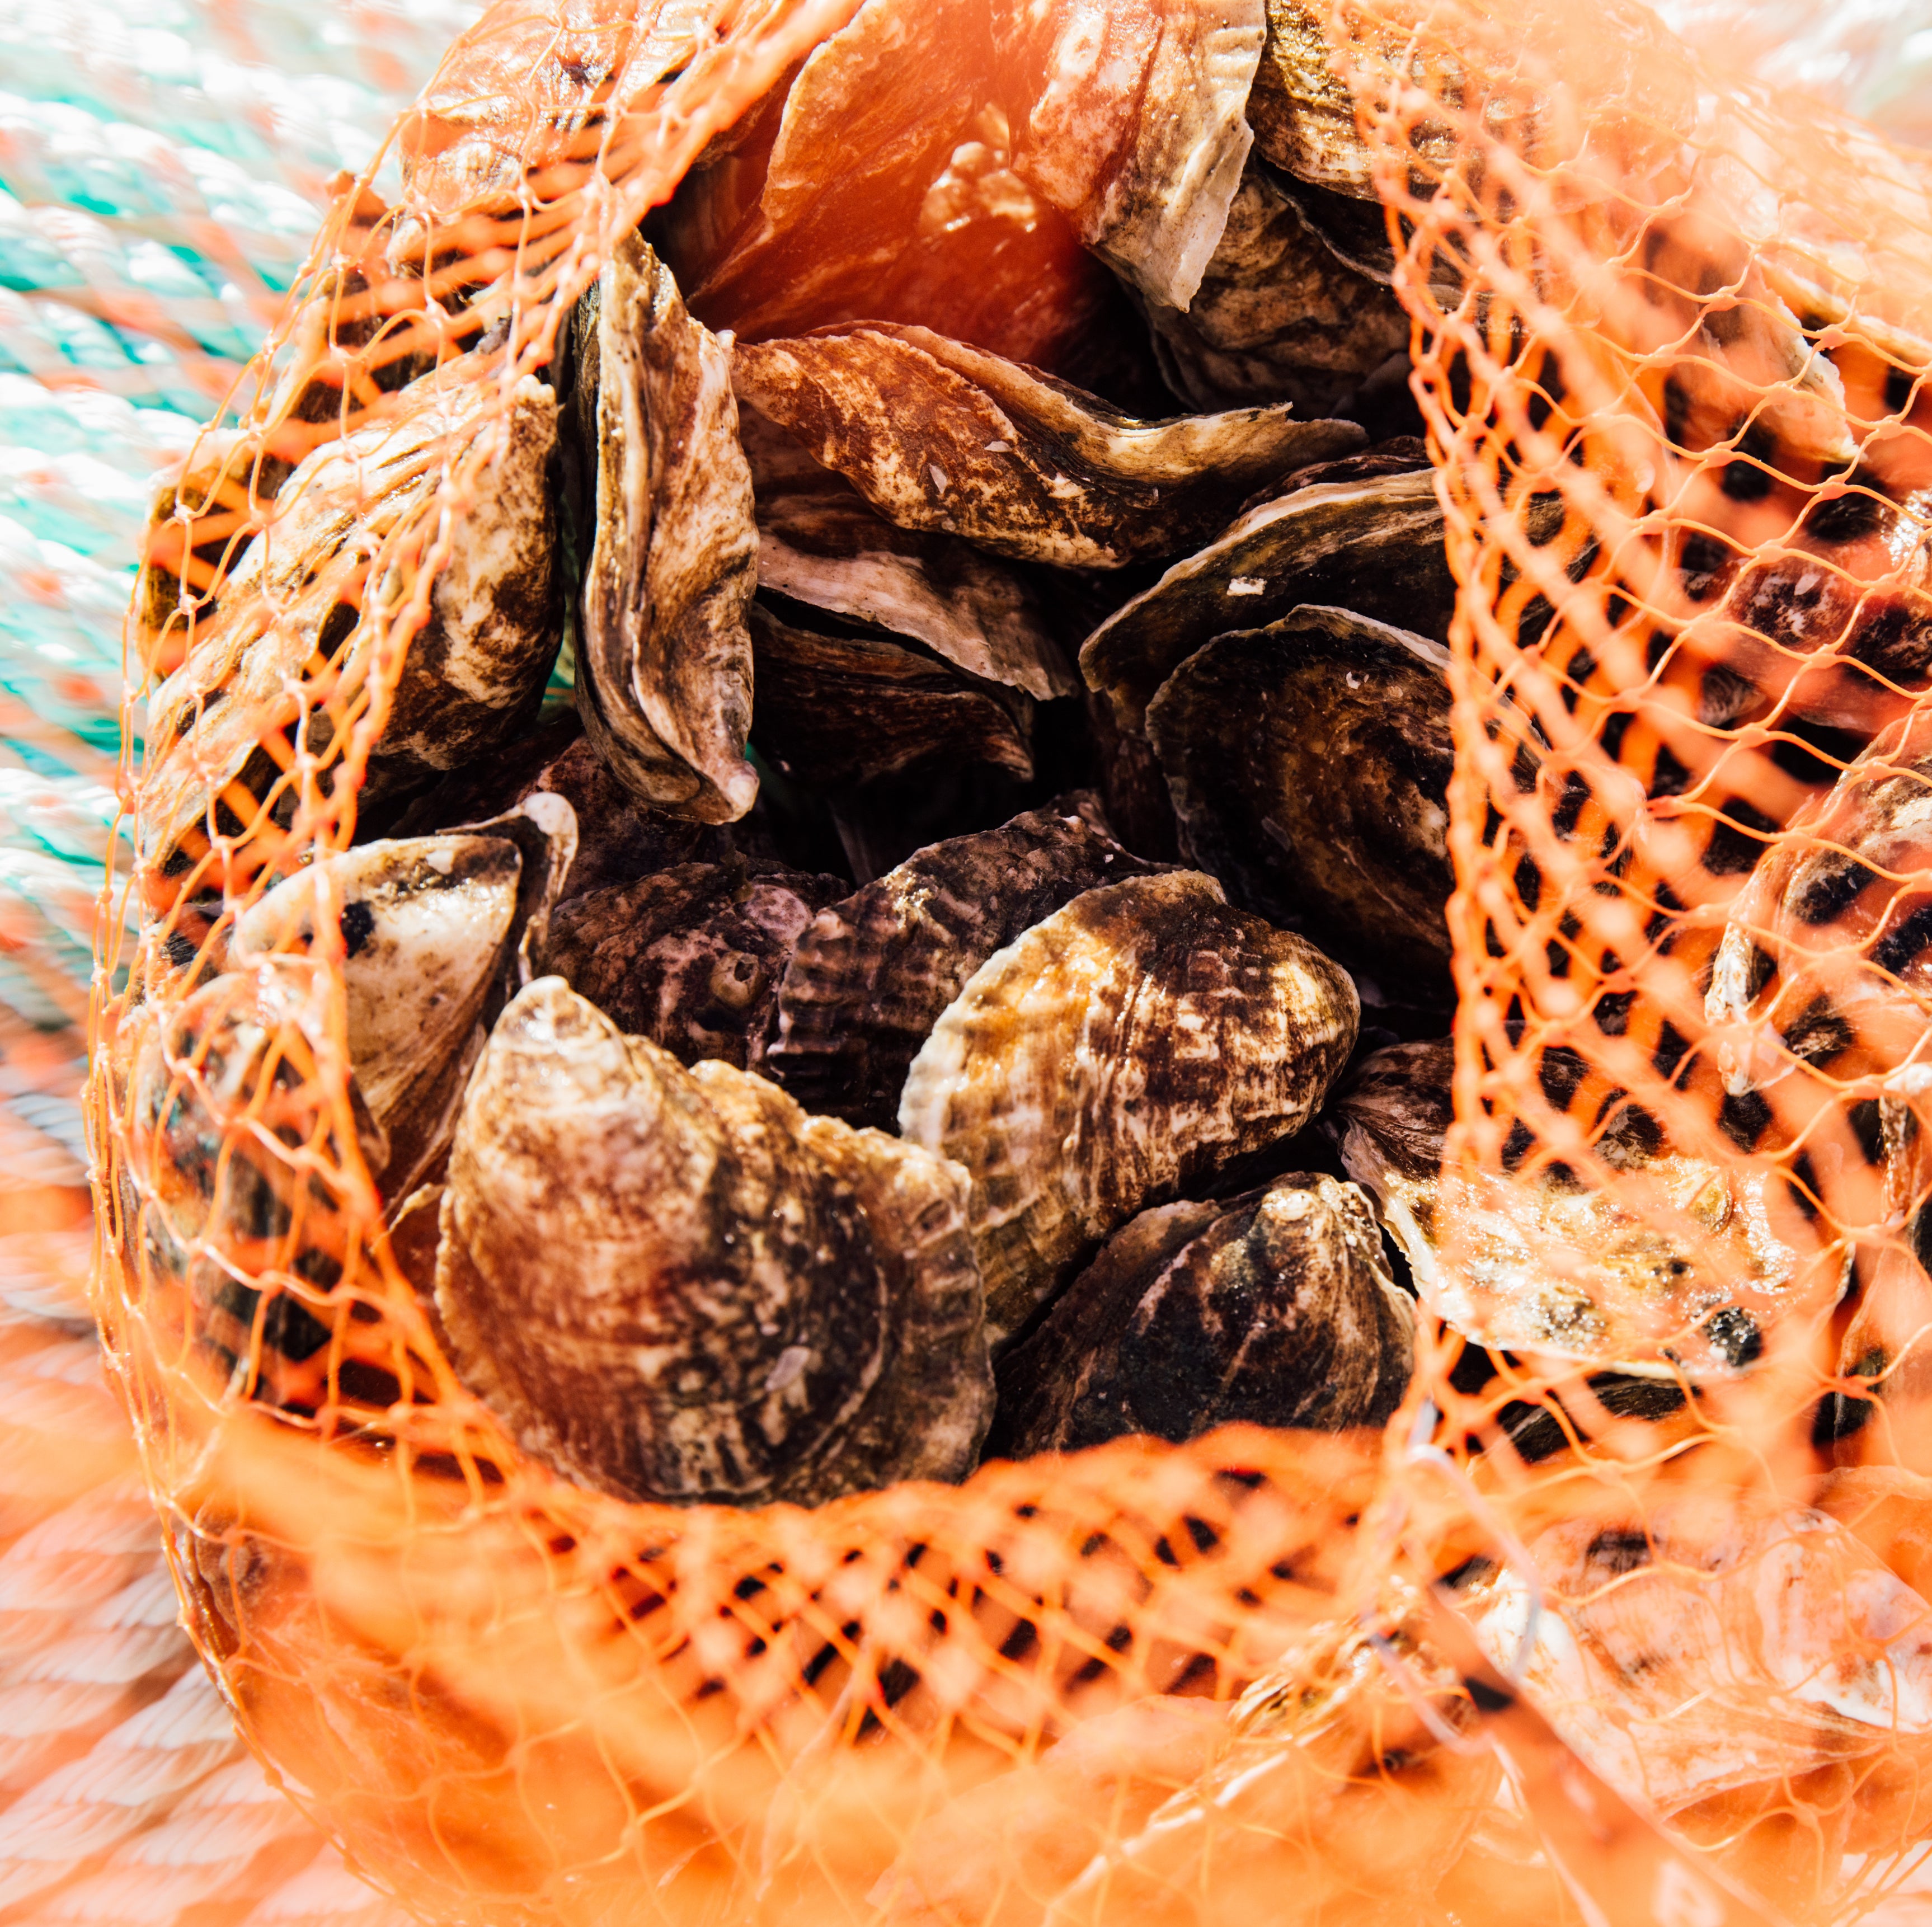 100 Count Bag of Local NJ Oysters – Barnegat Oyster Collective